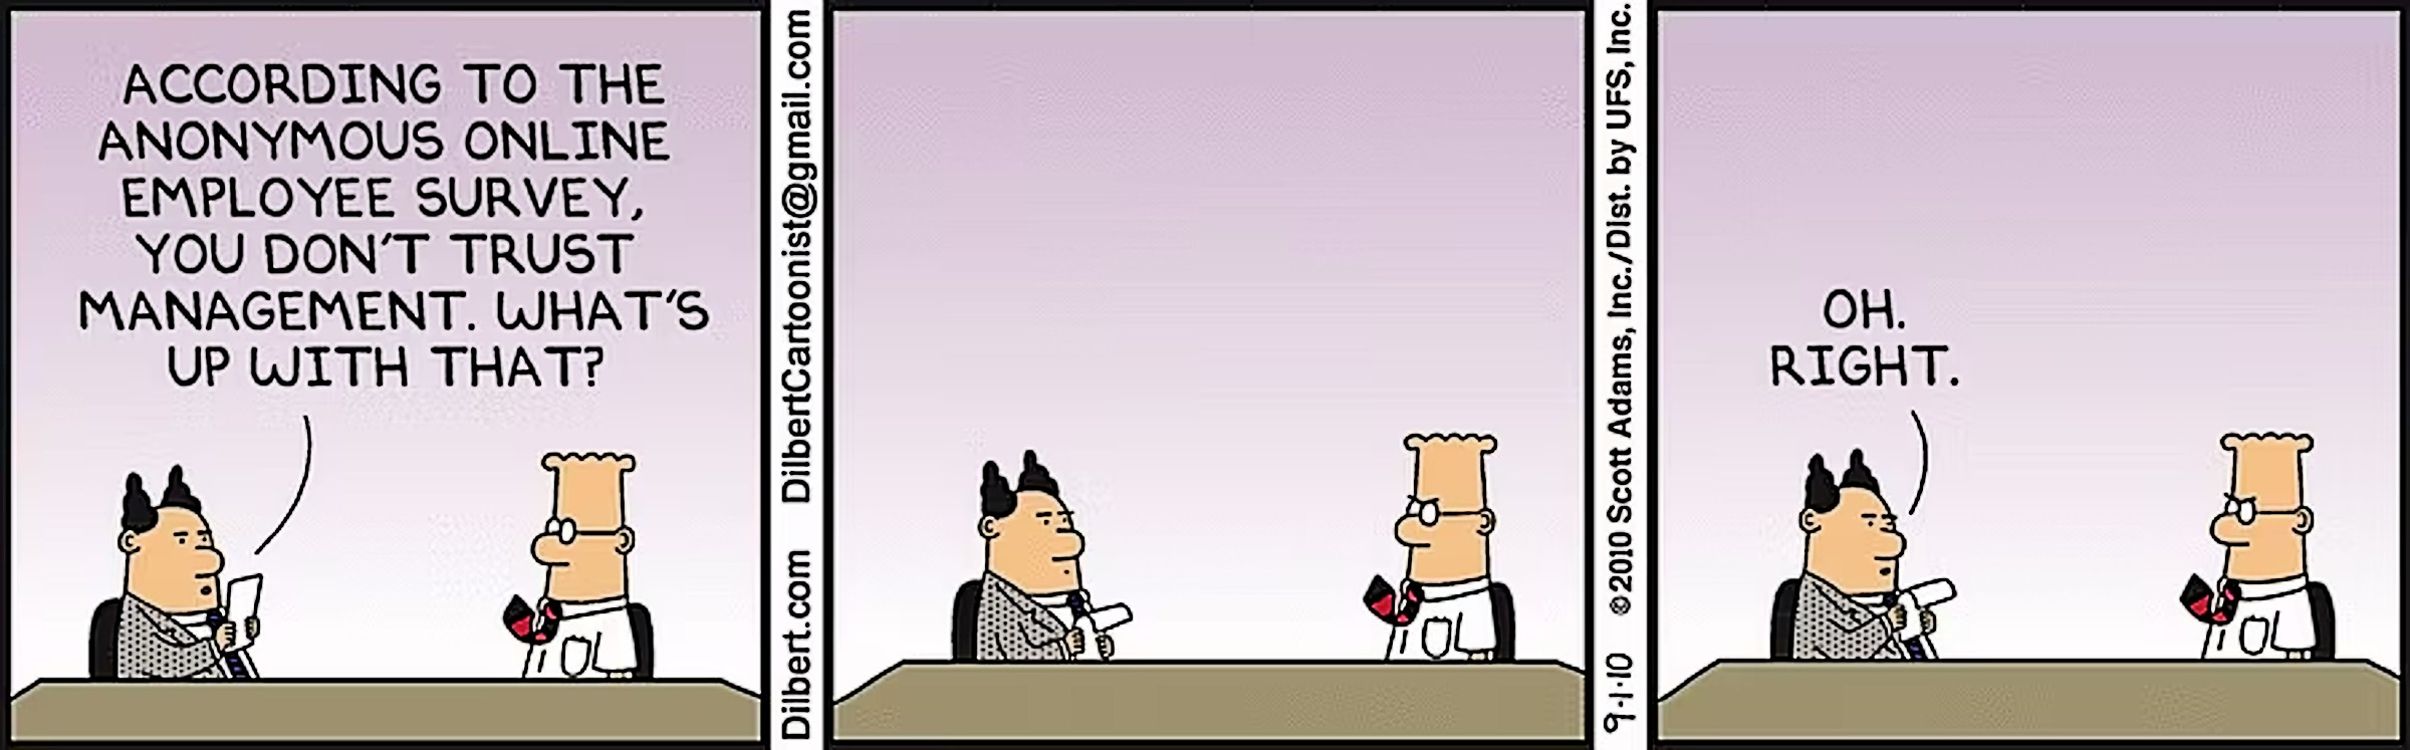 Dilbert gets entrapped by an anonymous survey